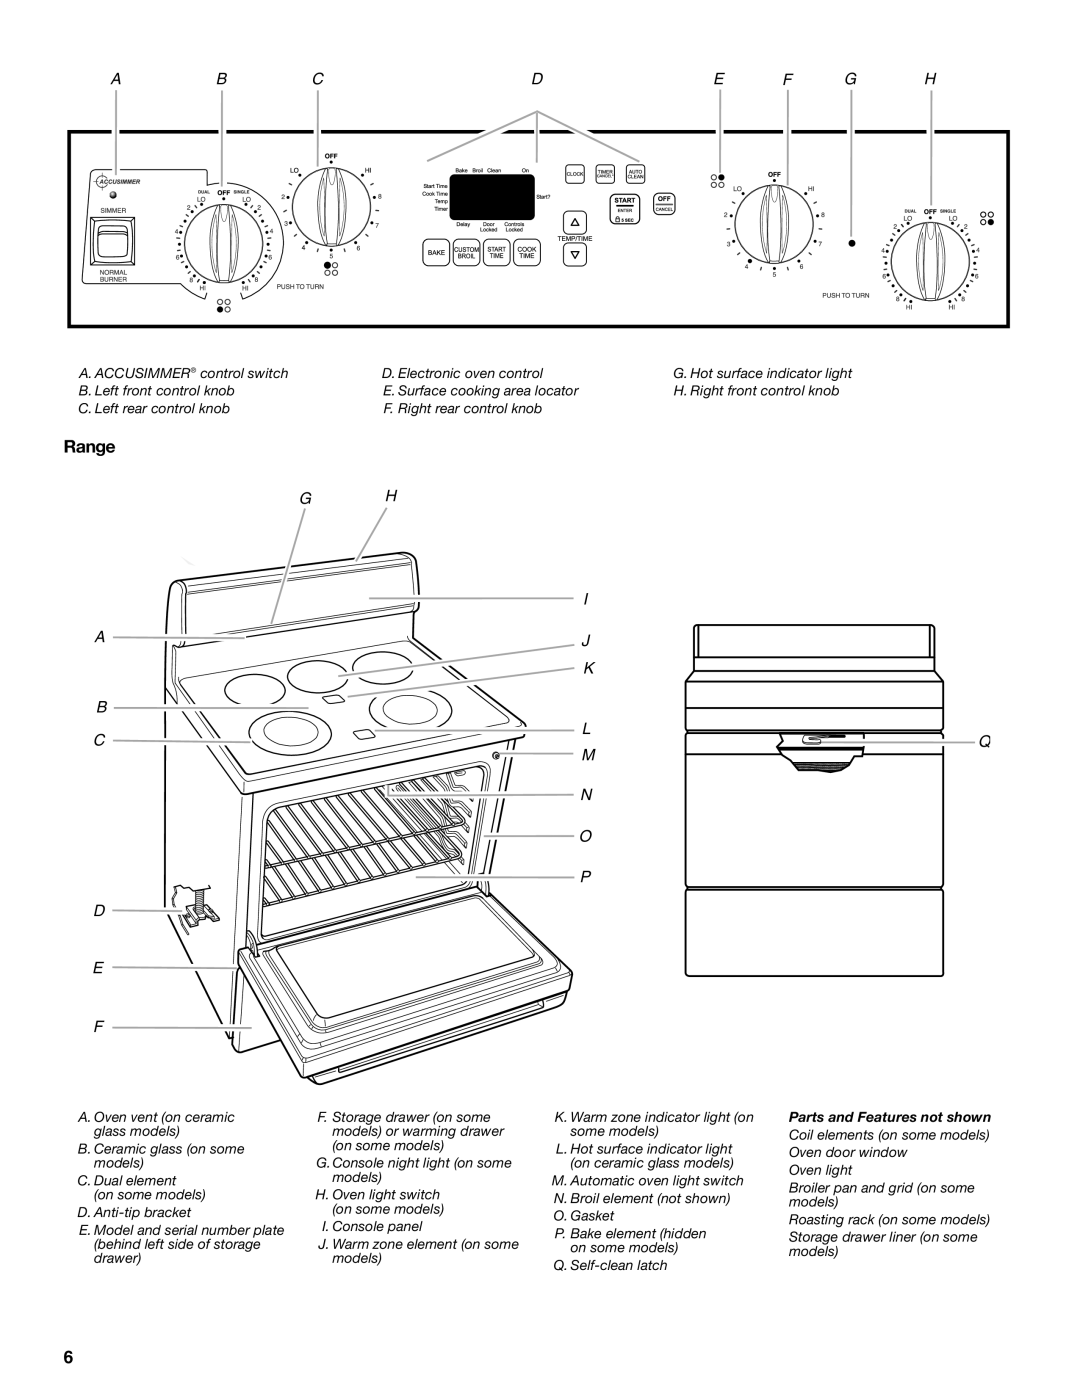 Whirlpool 9761862 manual Range, Abcde F G H, B L C Q M N O P D E F, Parts and Features not shown 